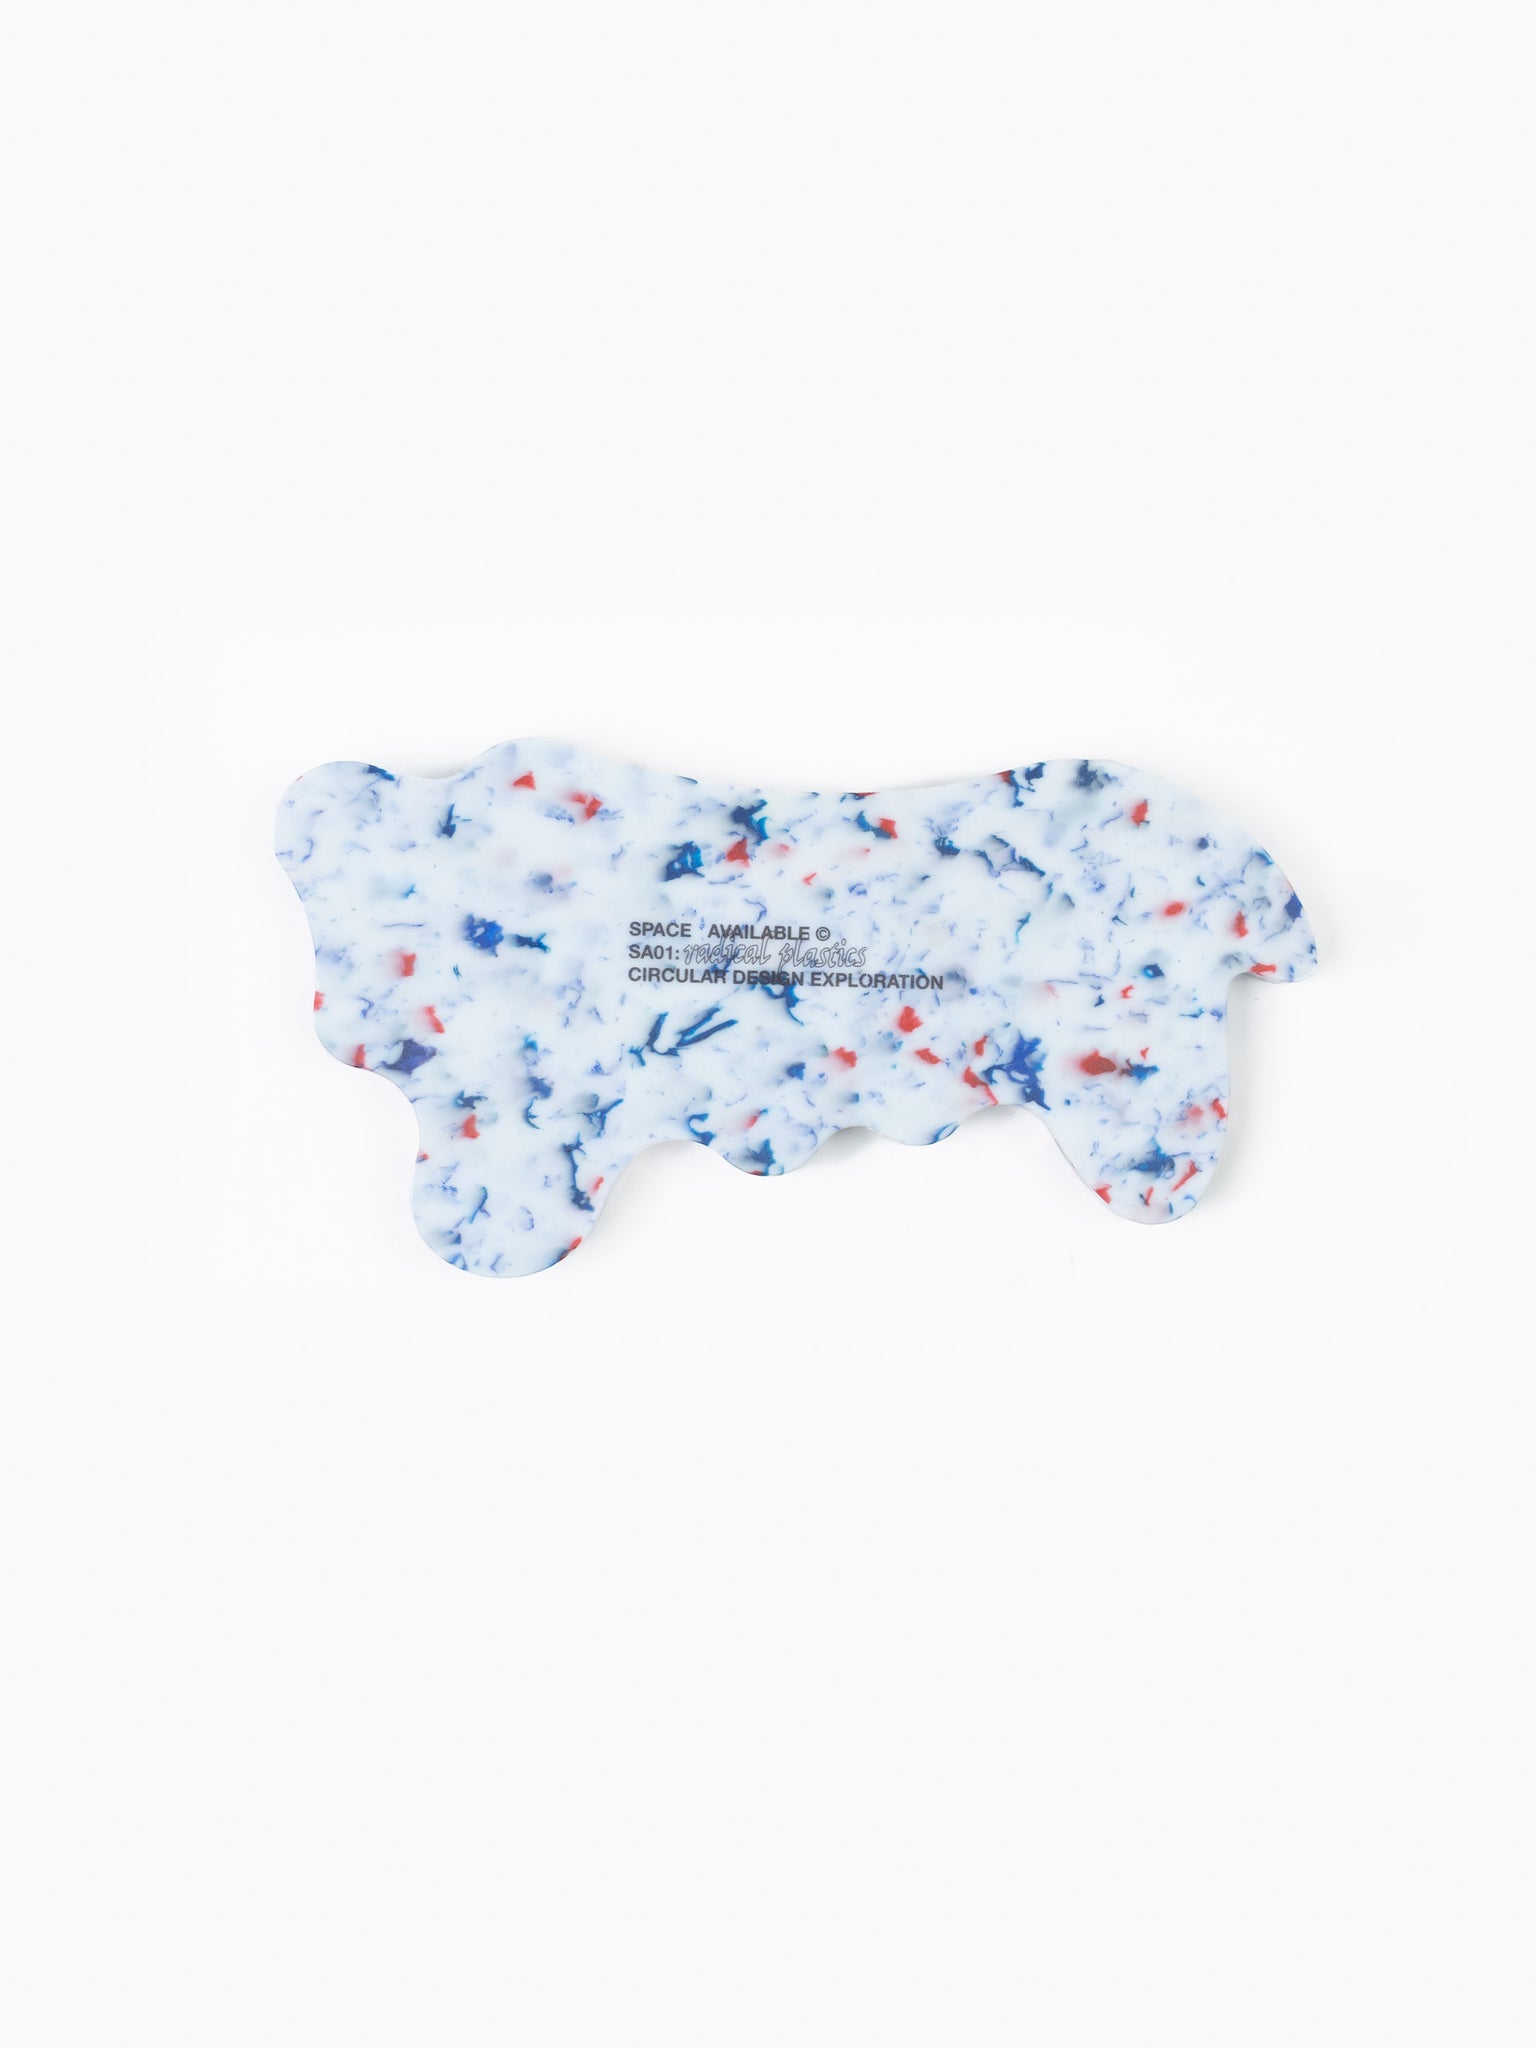 Melting Structures Desk Tray White